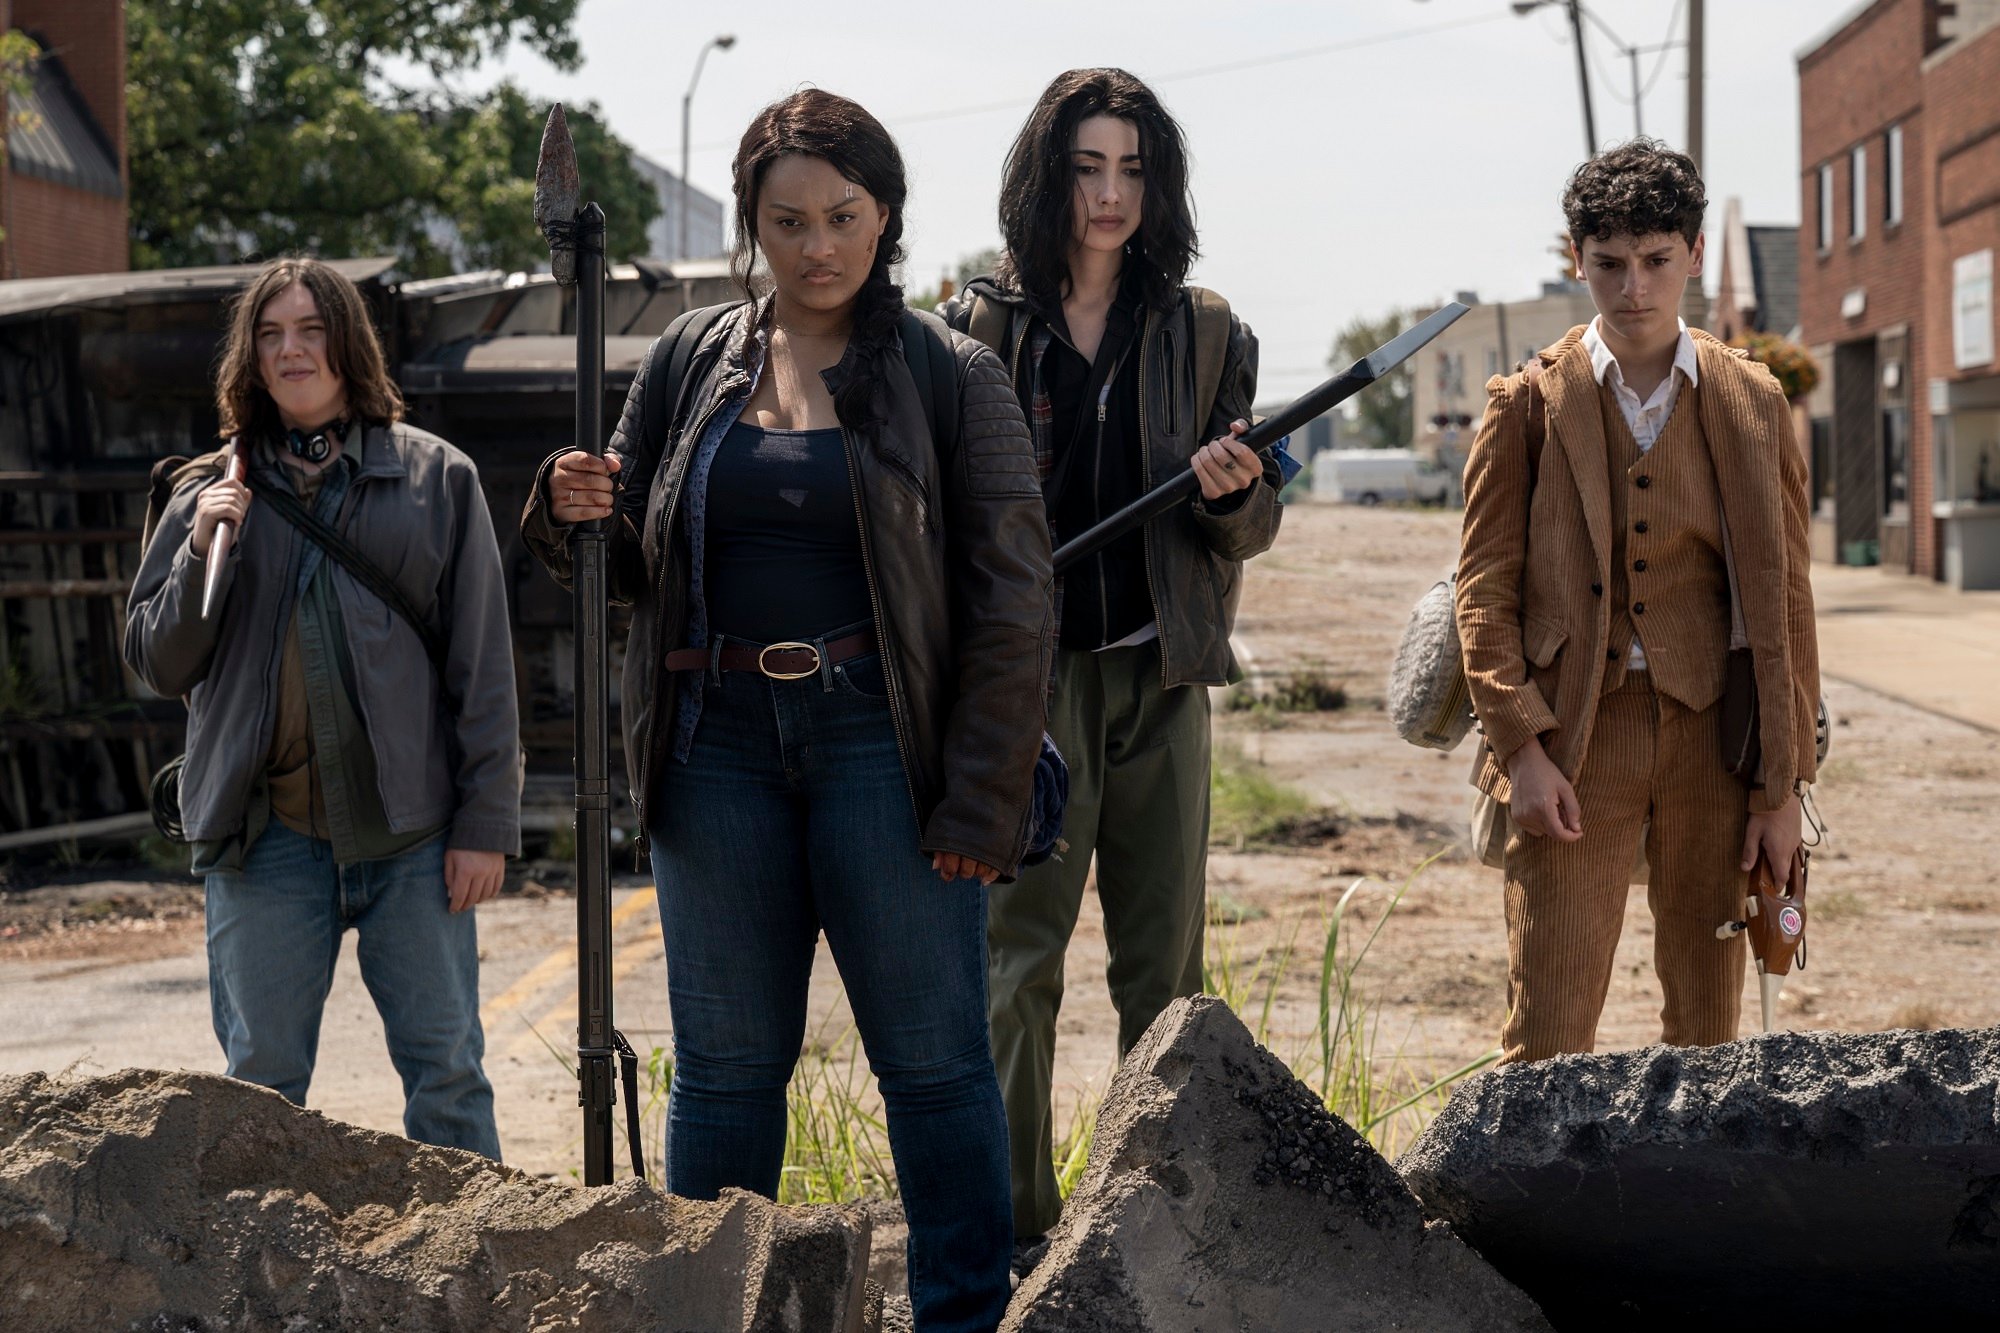 ‘The Walking Dead’ Universe is Like Juggling Chainsaws, According to Show Boss Scott M. Gimple